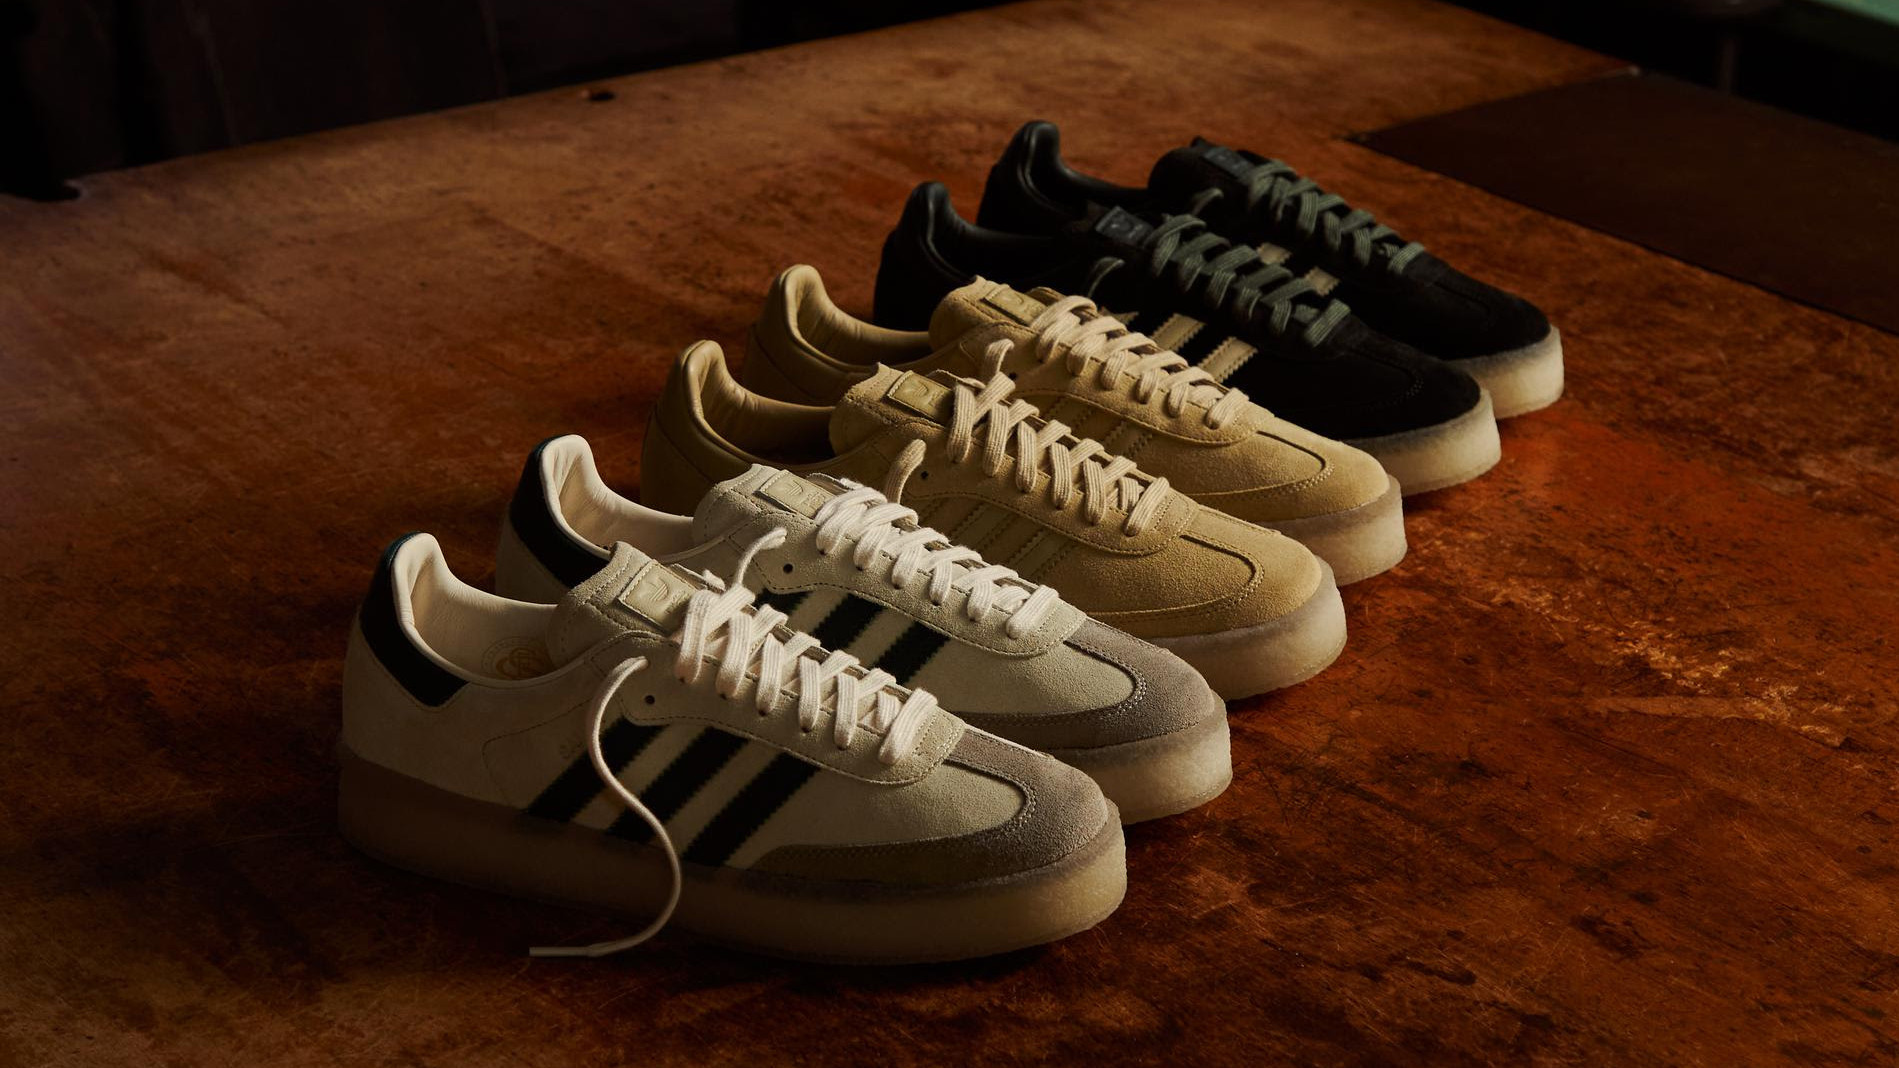 The Kith x Clarks x Adidas Samba Collab Releases This Week